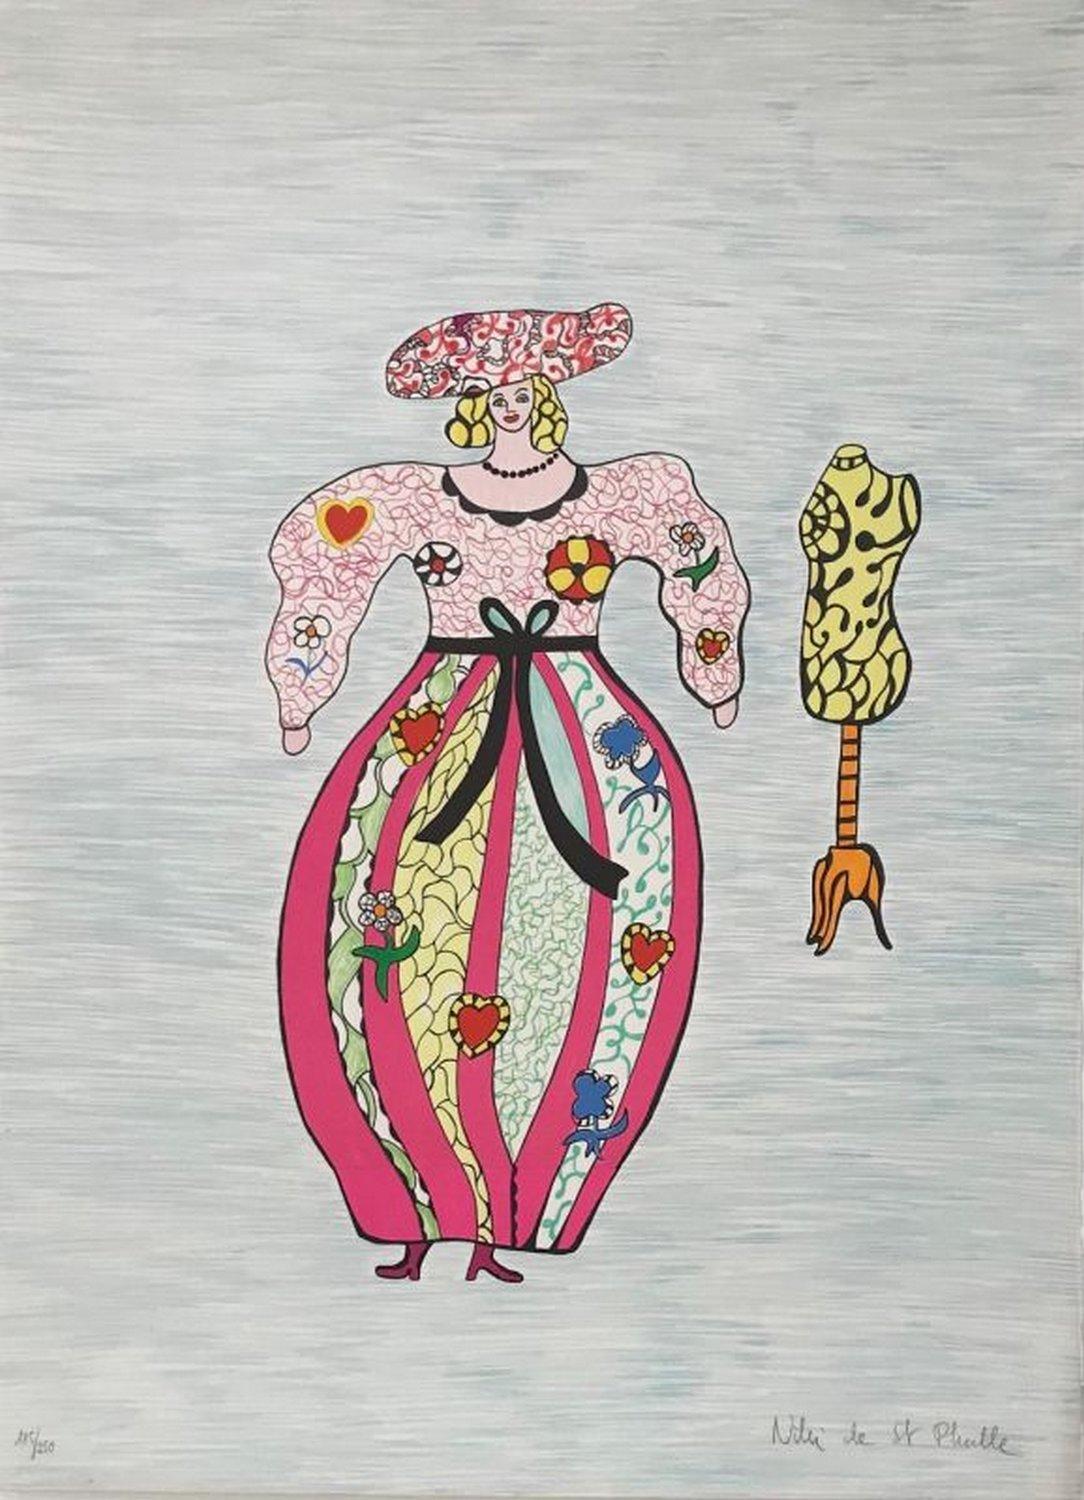 Niki de Saint Phalle Abstract Print - The model and the milliner 